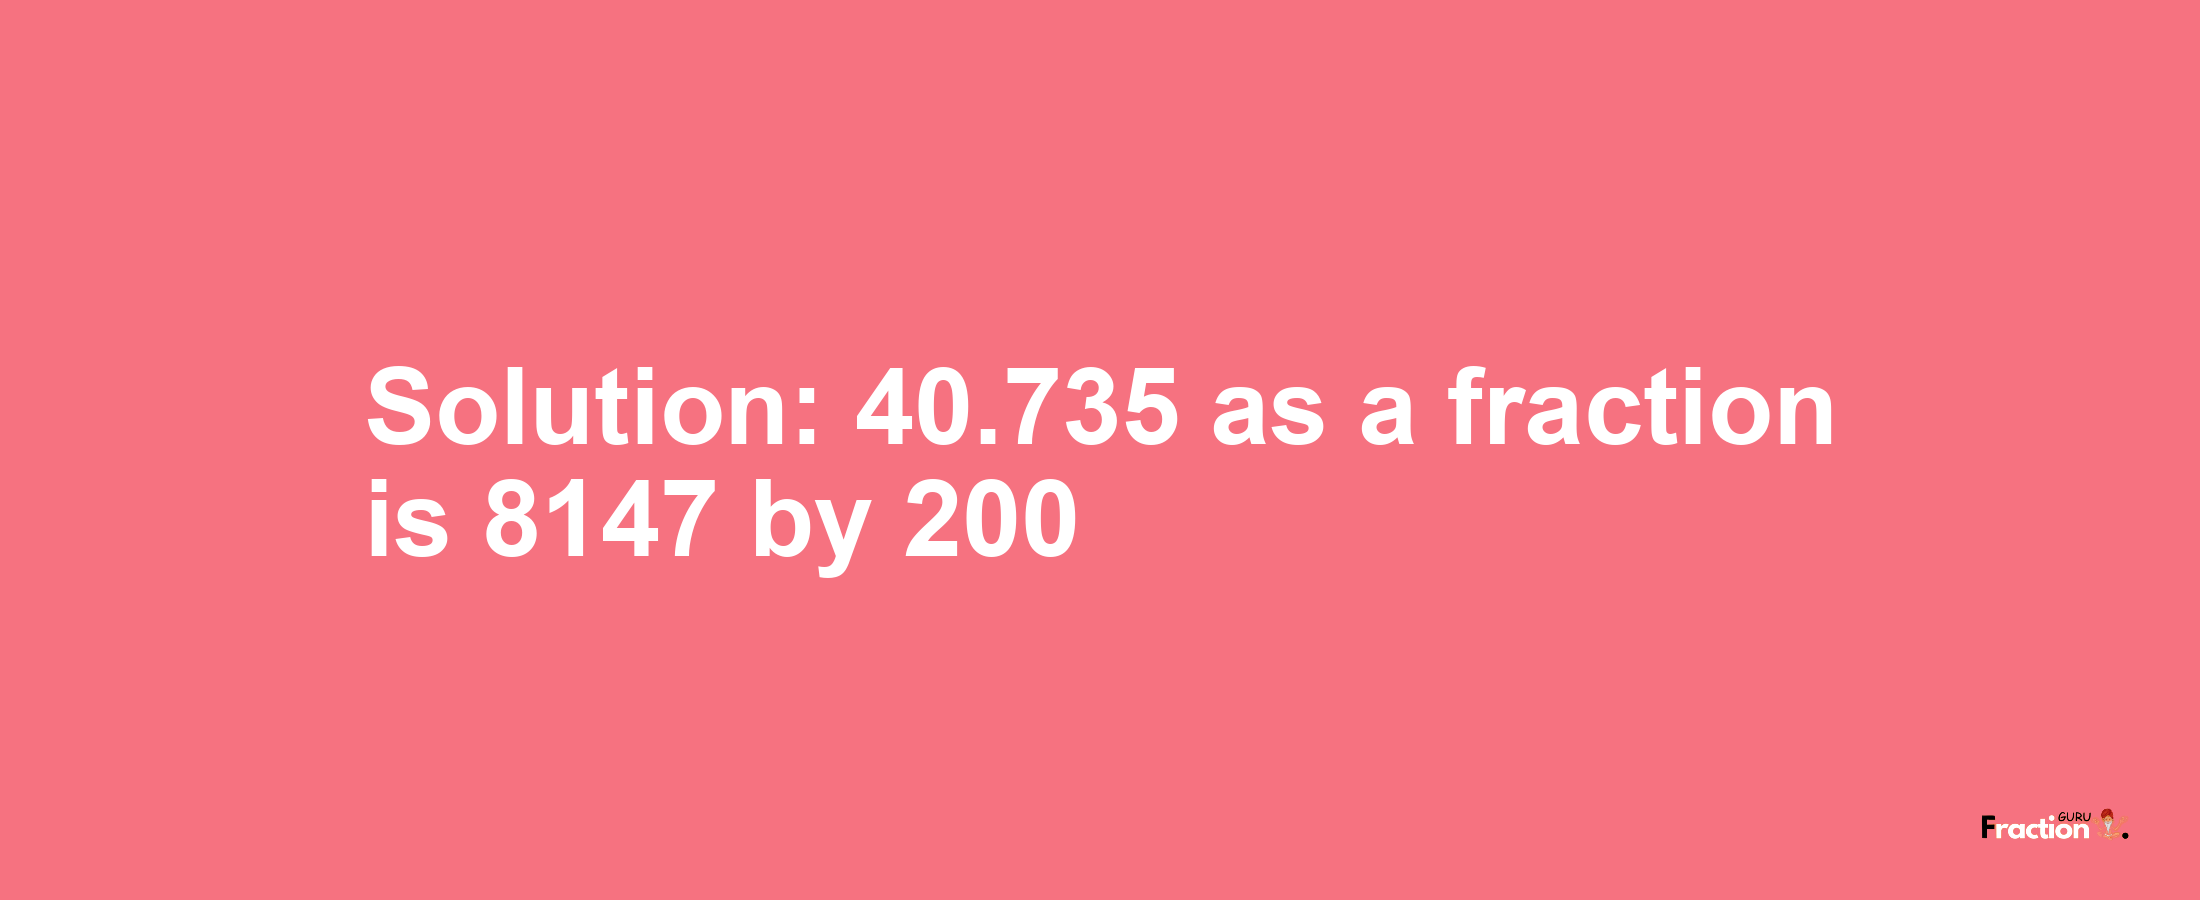 Solution:40.735 as a fraction is 8147/200